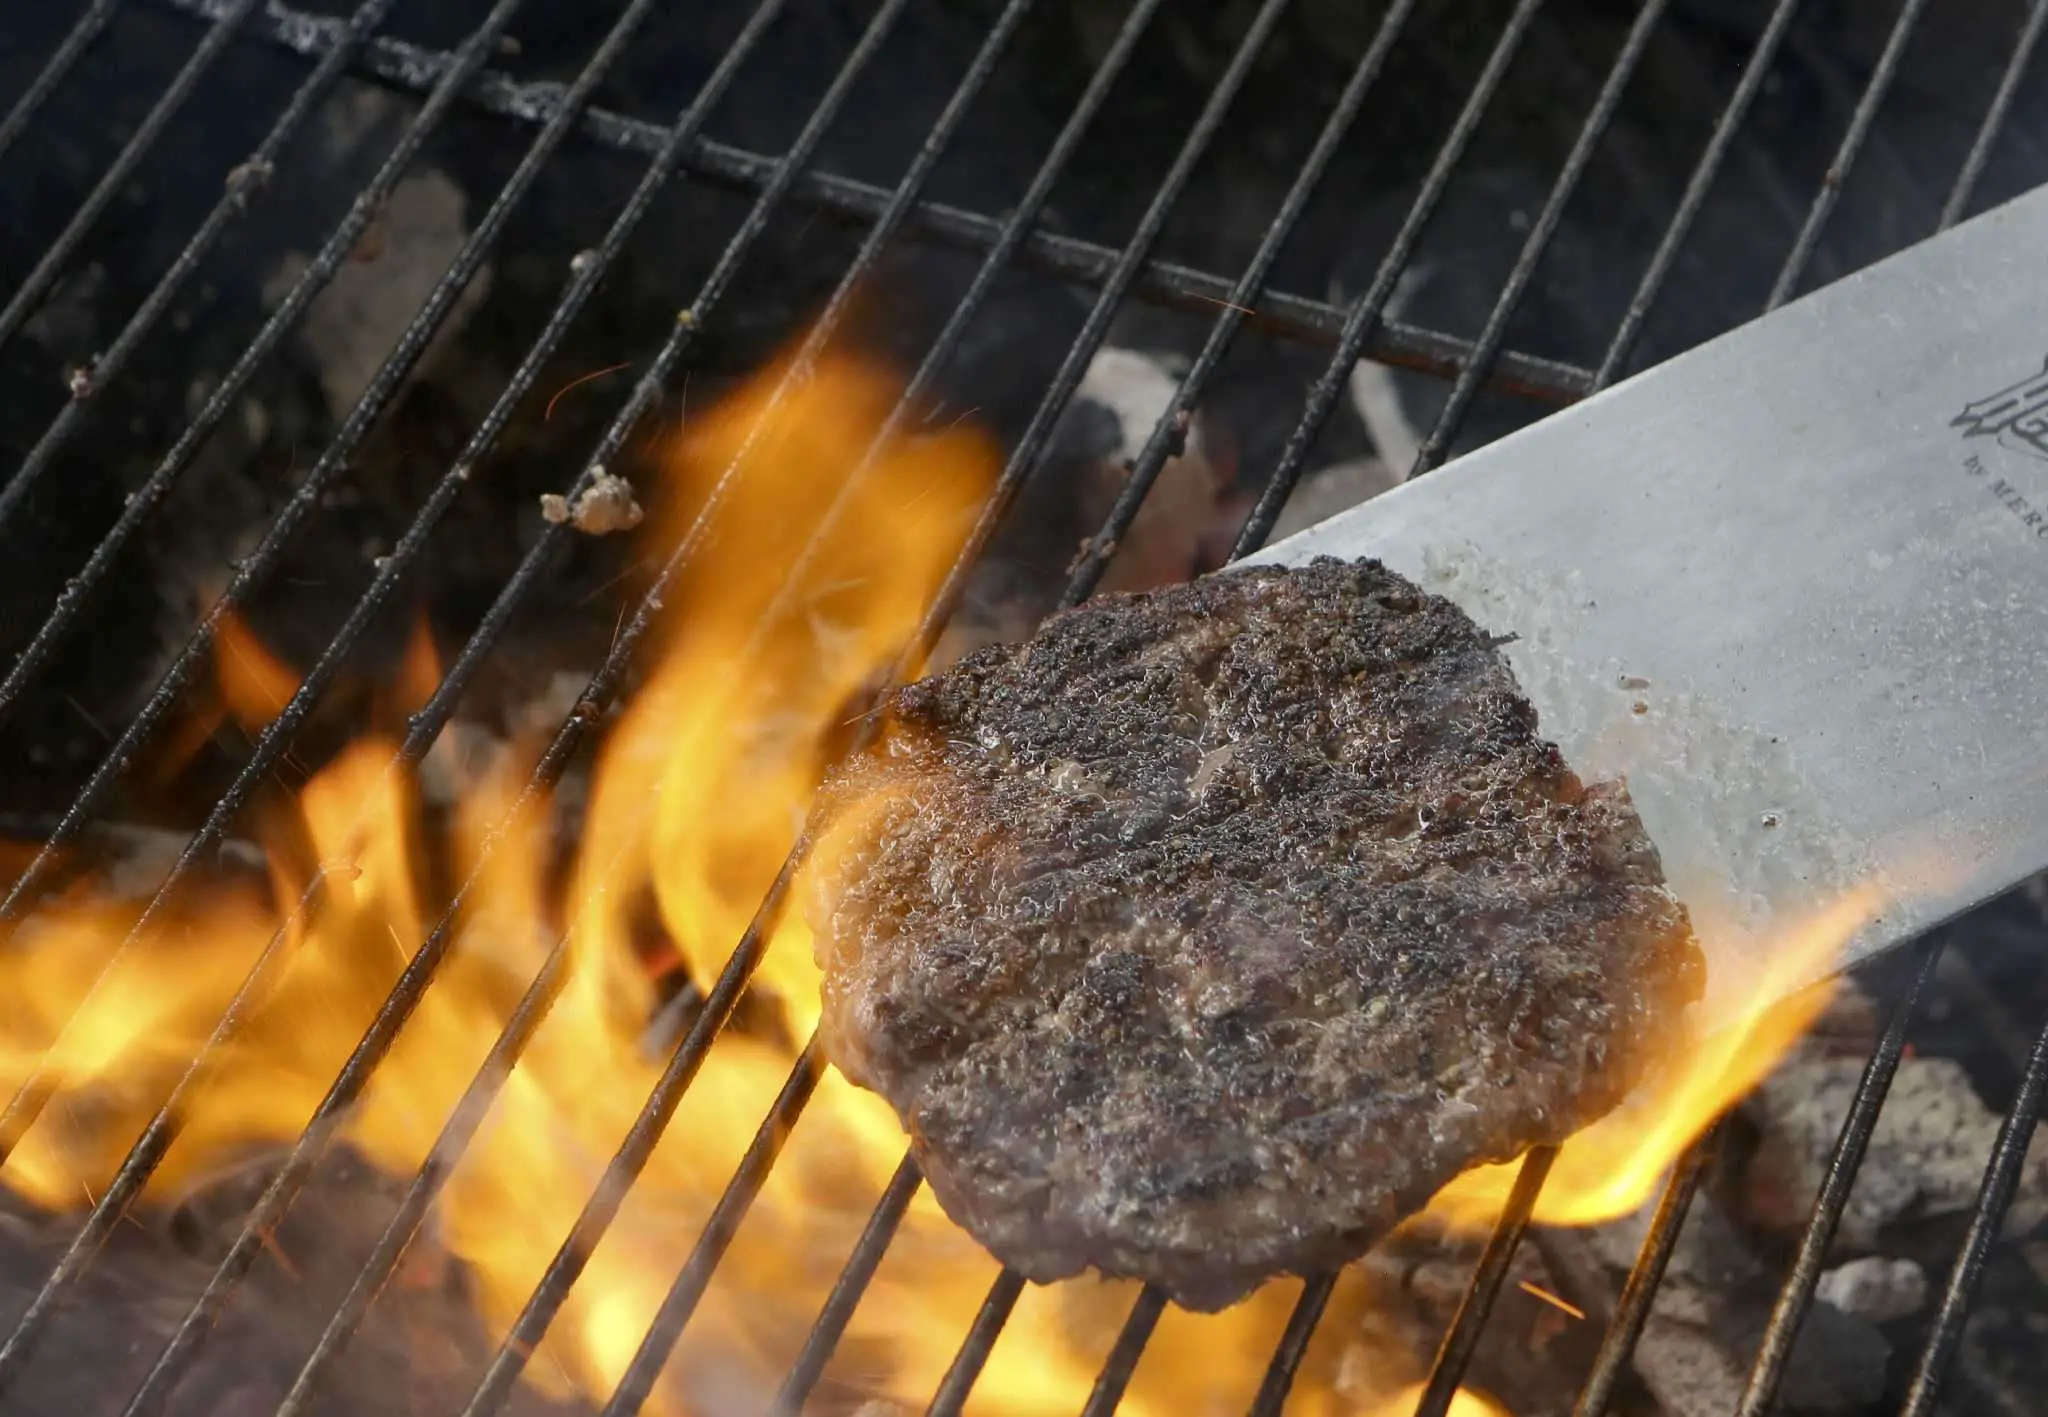 How to Cook: Cooking burgers on a charcoal grill